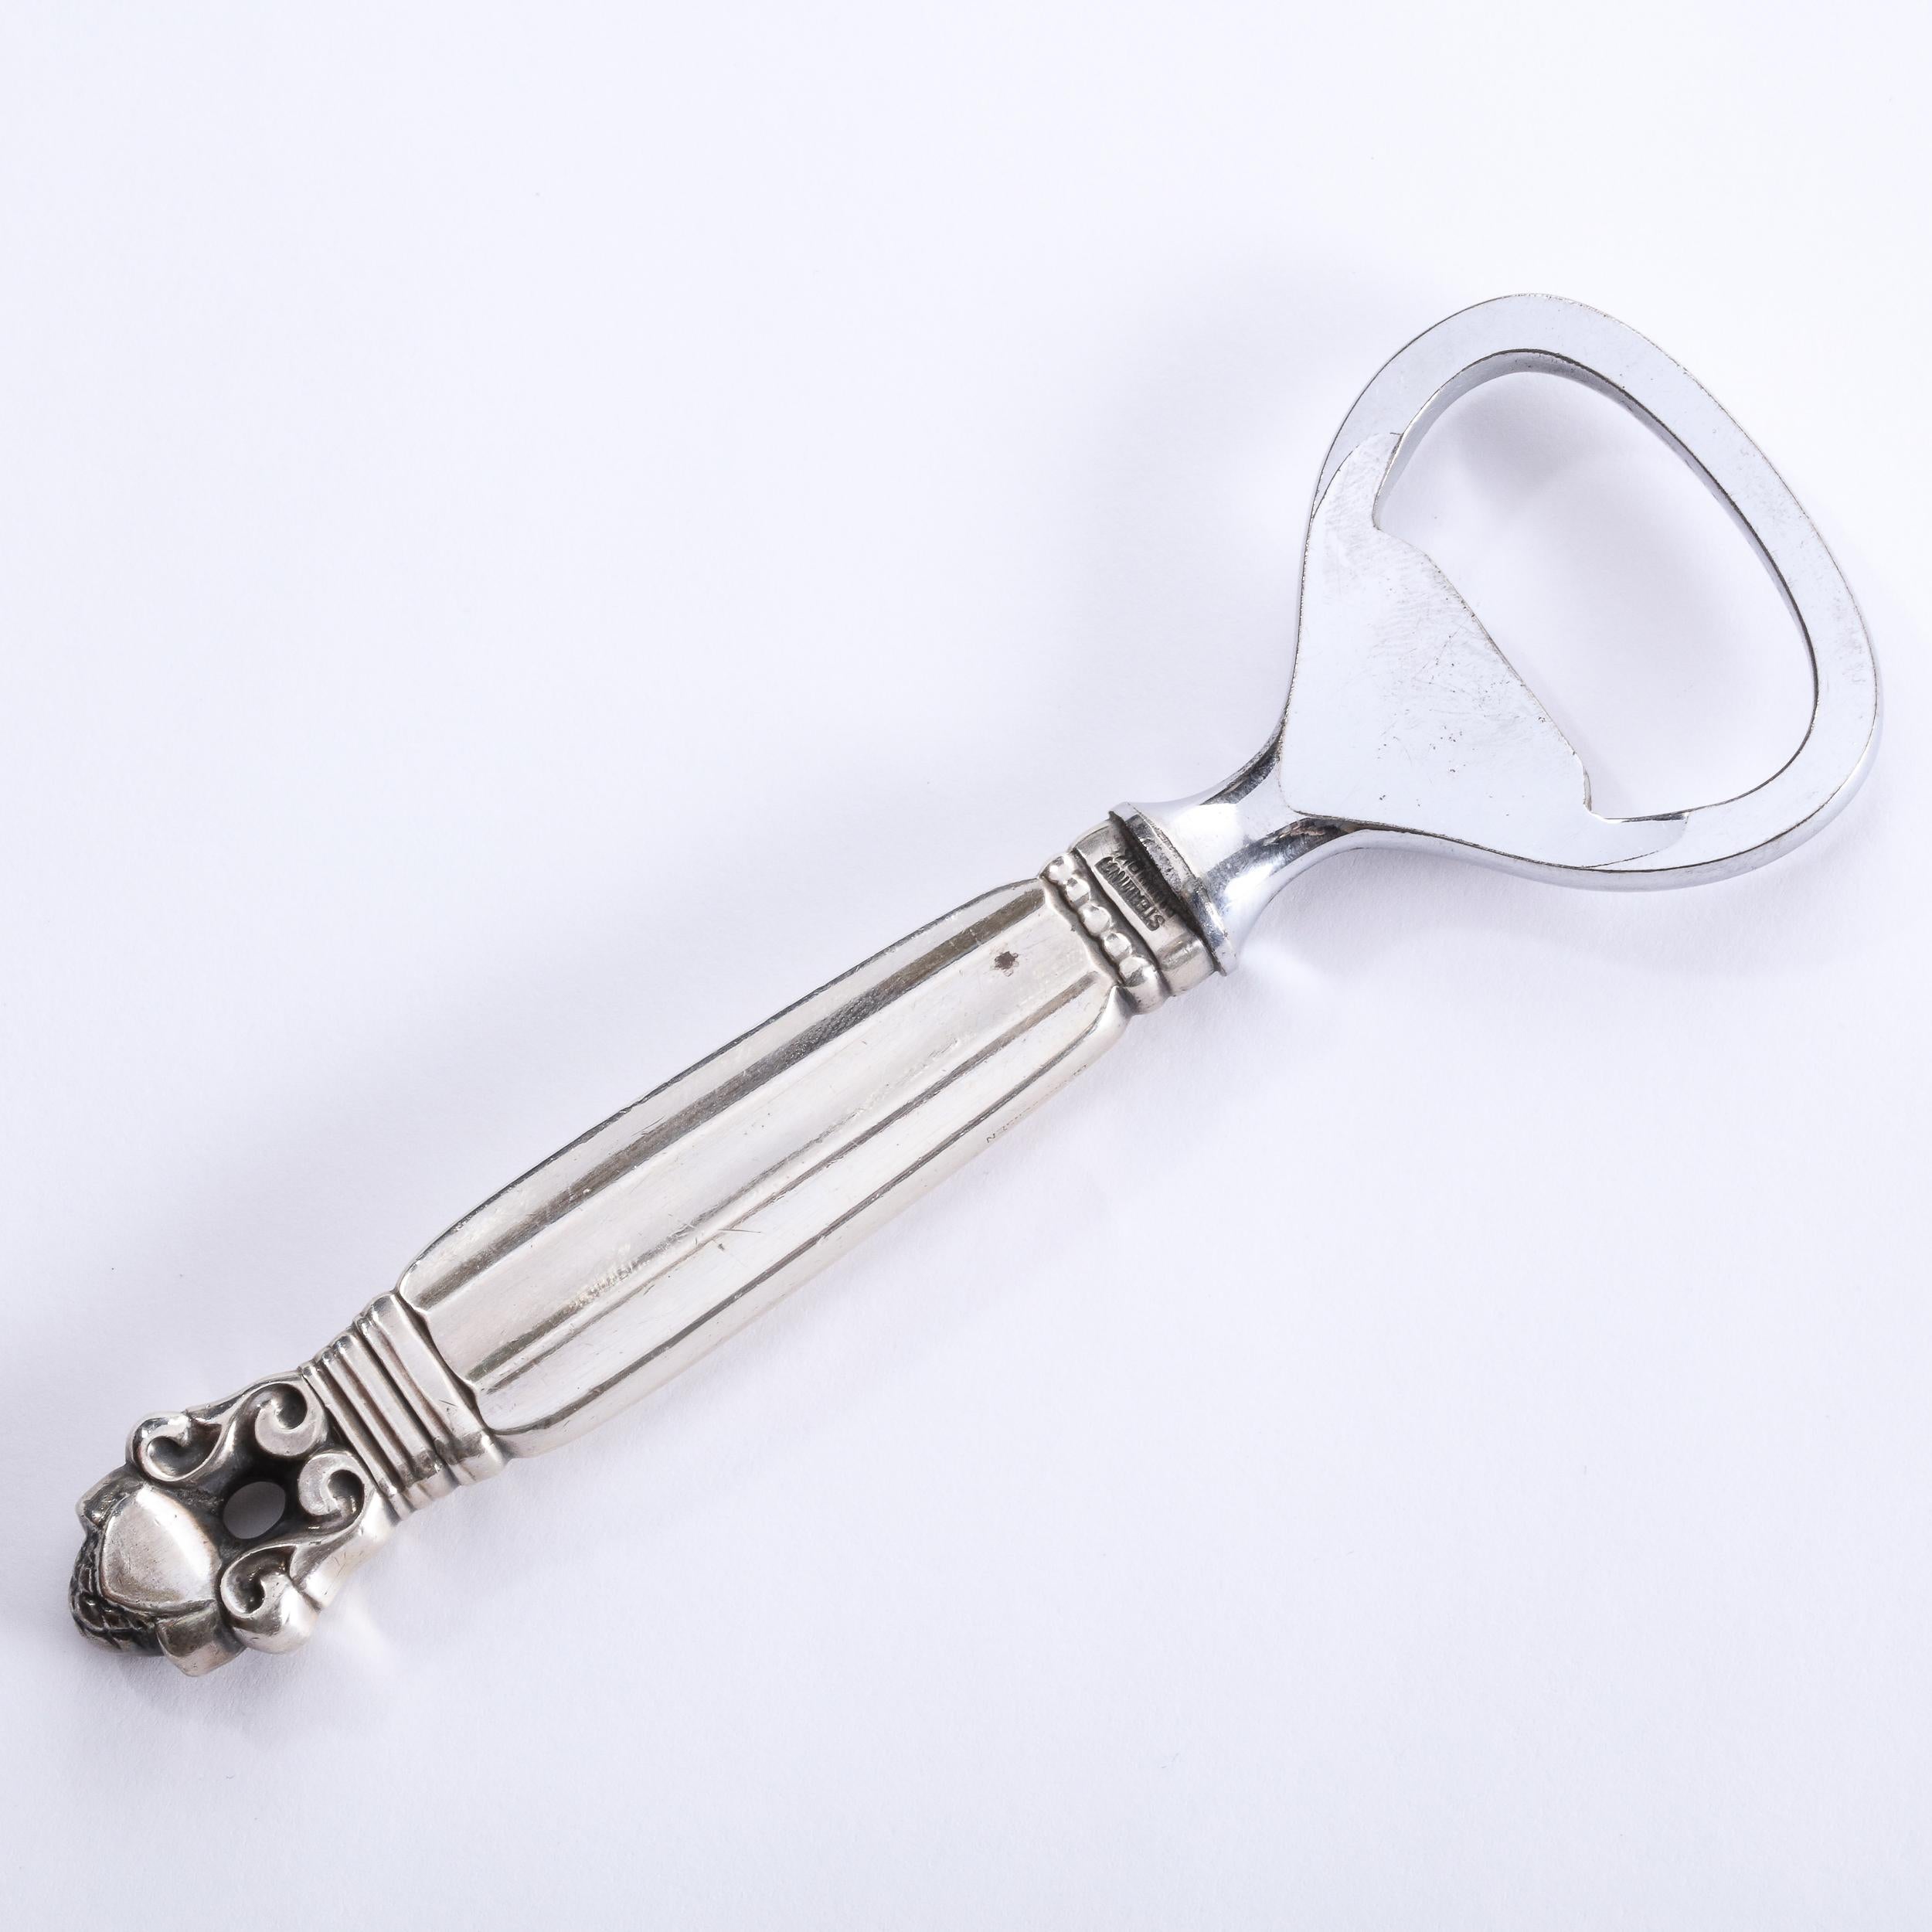 This elegant Mid-Century Modern bottle opener was realized in Denmark, circa 1960. It features a neoclassical stylized scroll form base; a reeded body; as well as channel detailing at its base and neck- in lustrous sterling silver. This is a